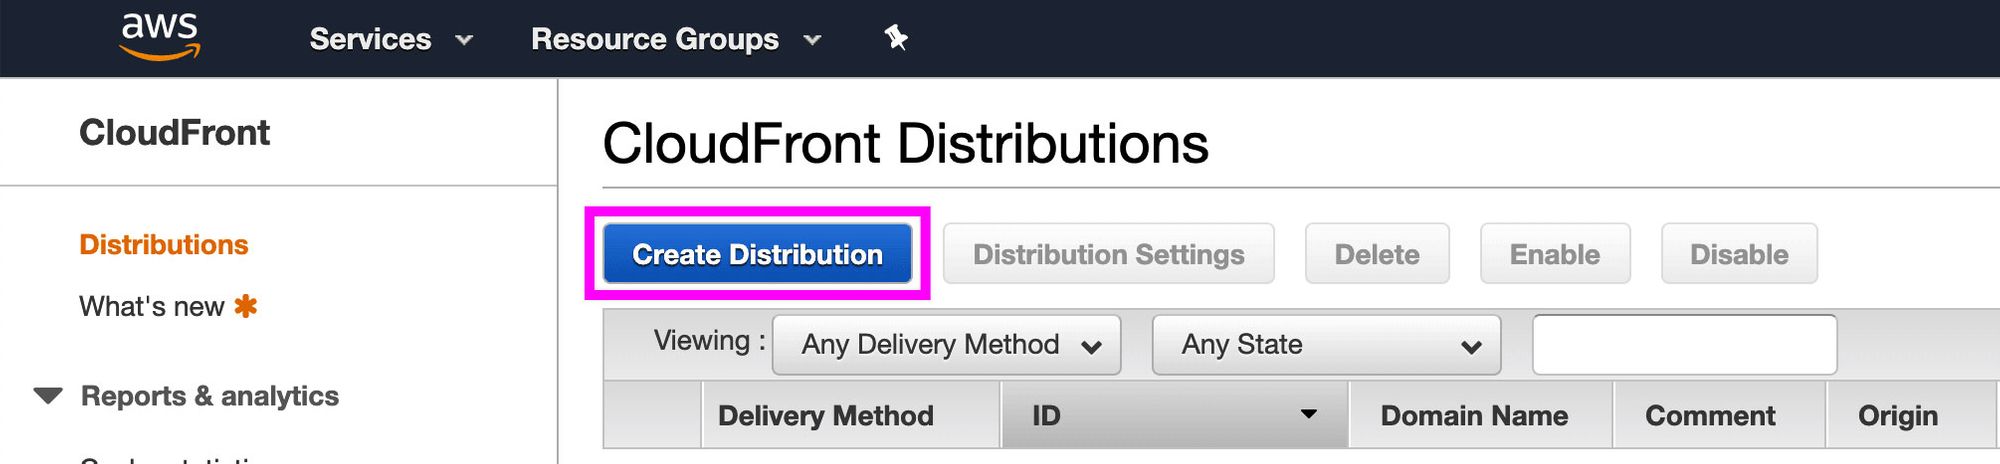 aws-cloudfront-create-distribution